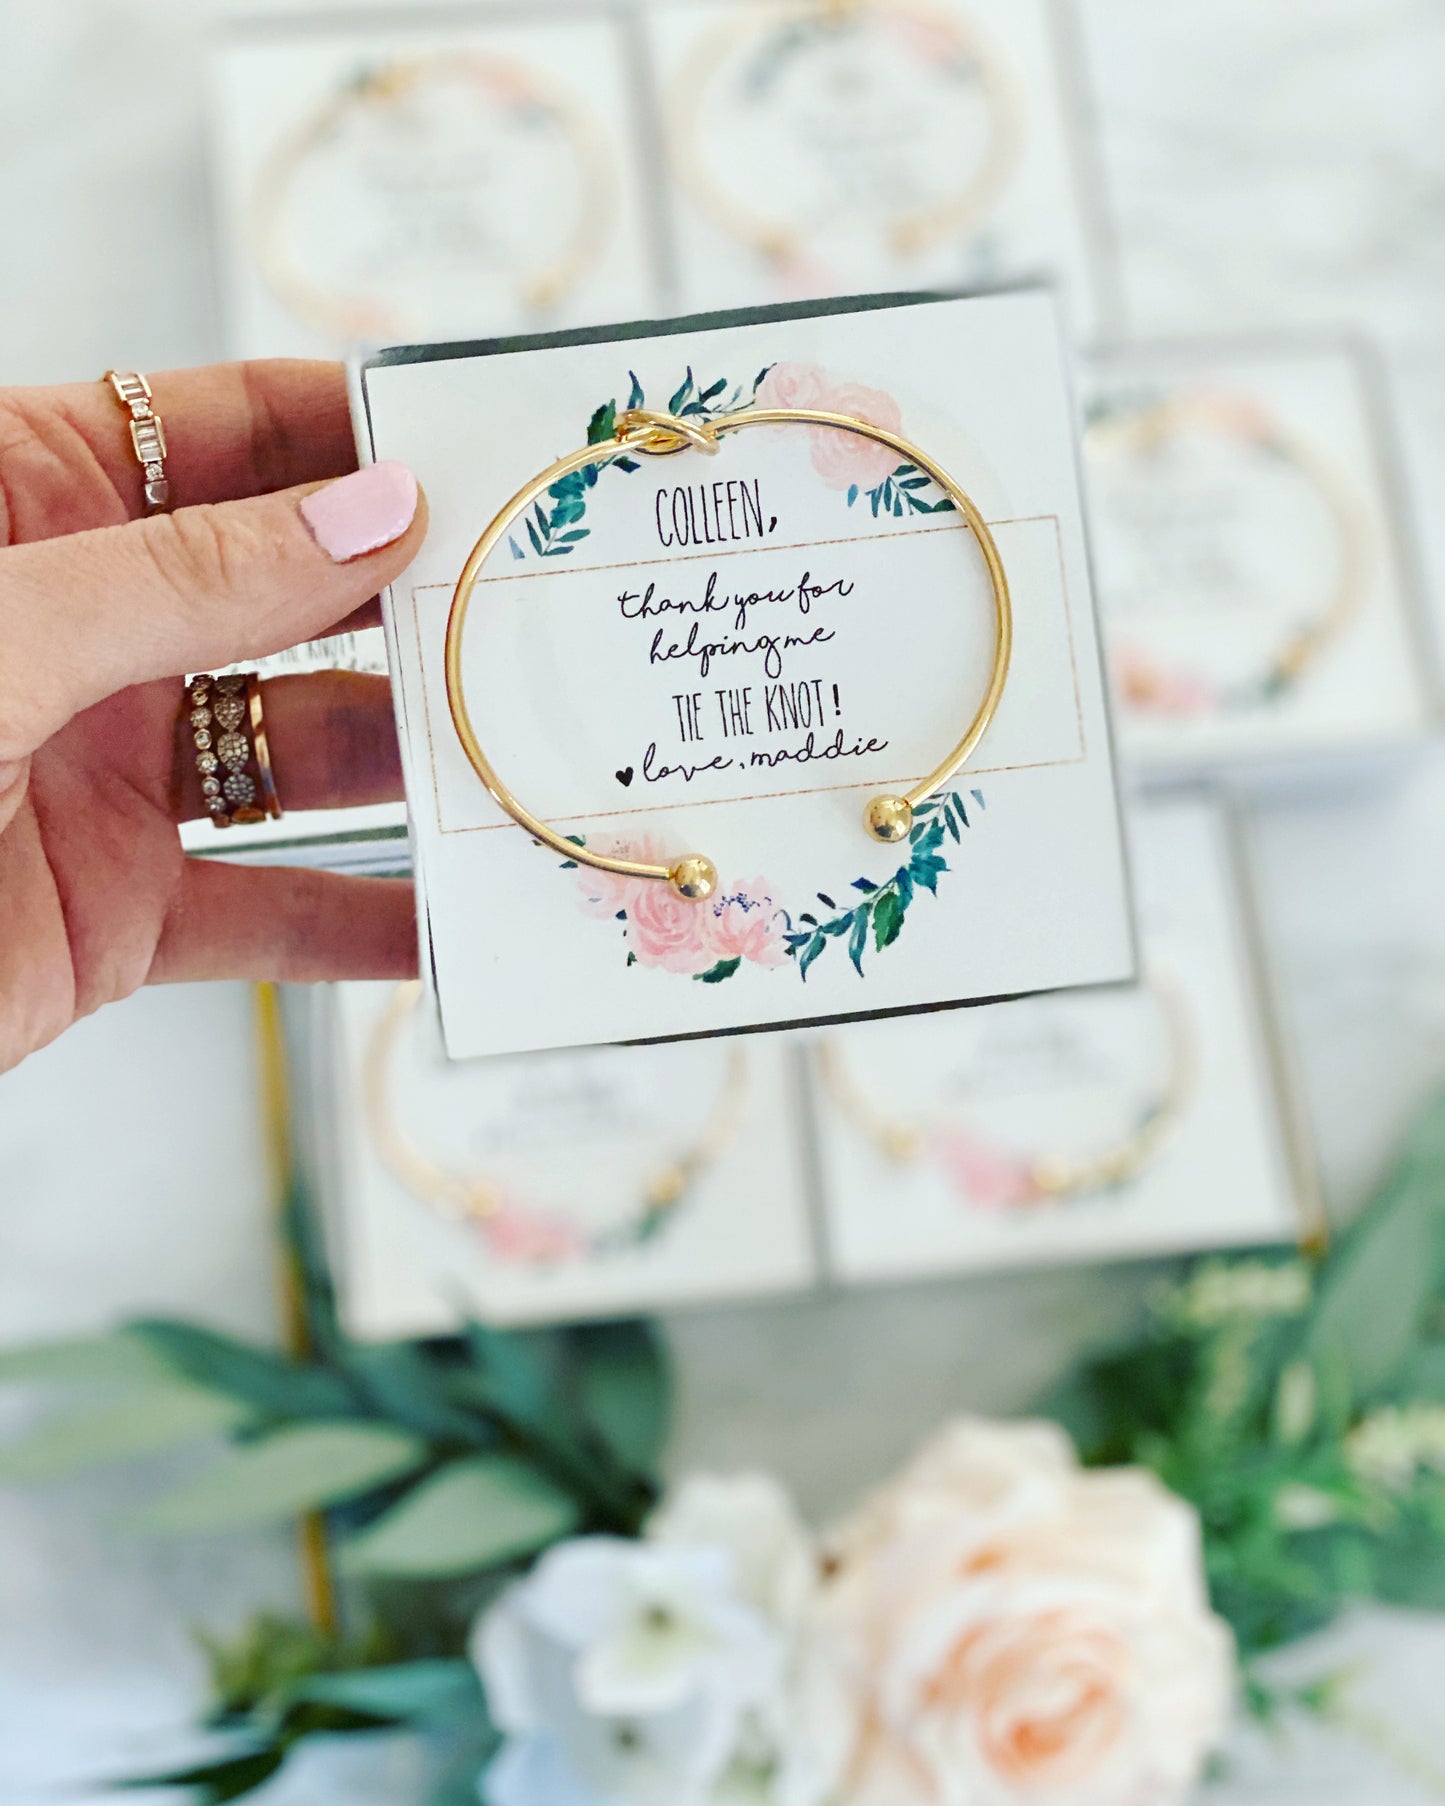 I'm Such a Lucky Bride! Knot Bangle & Floral Wreath Card